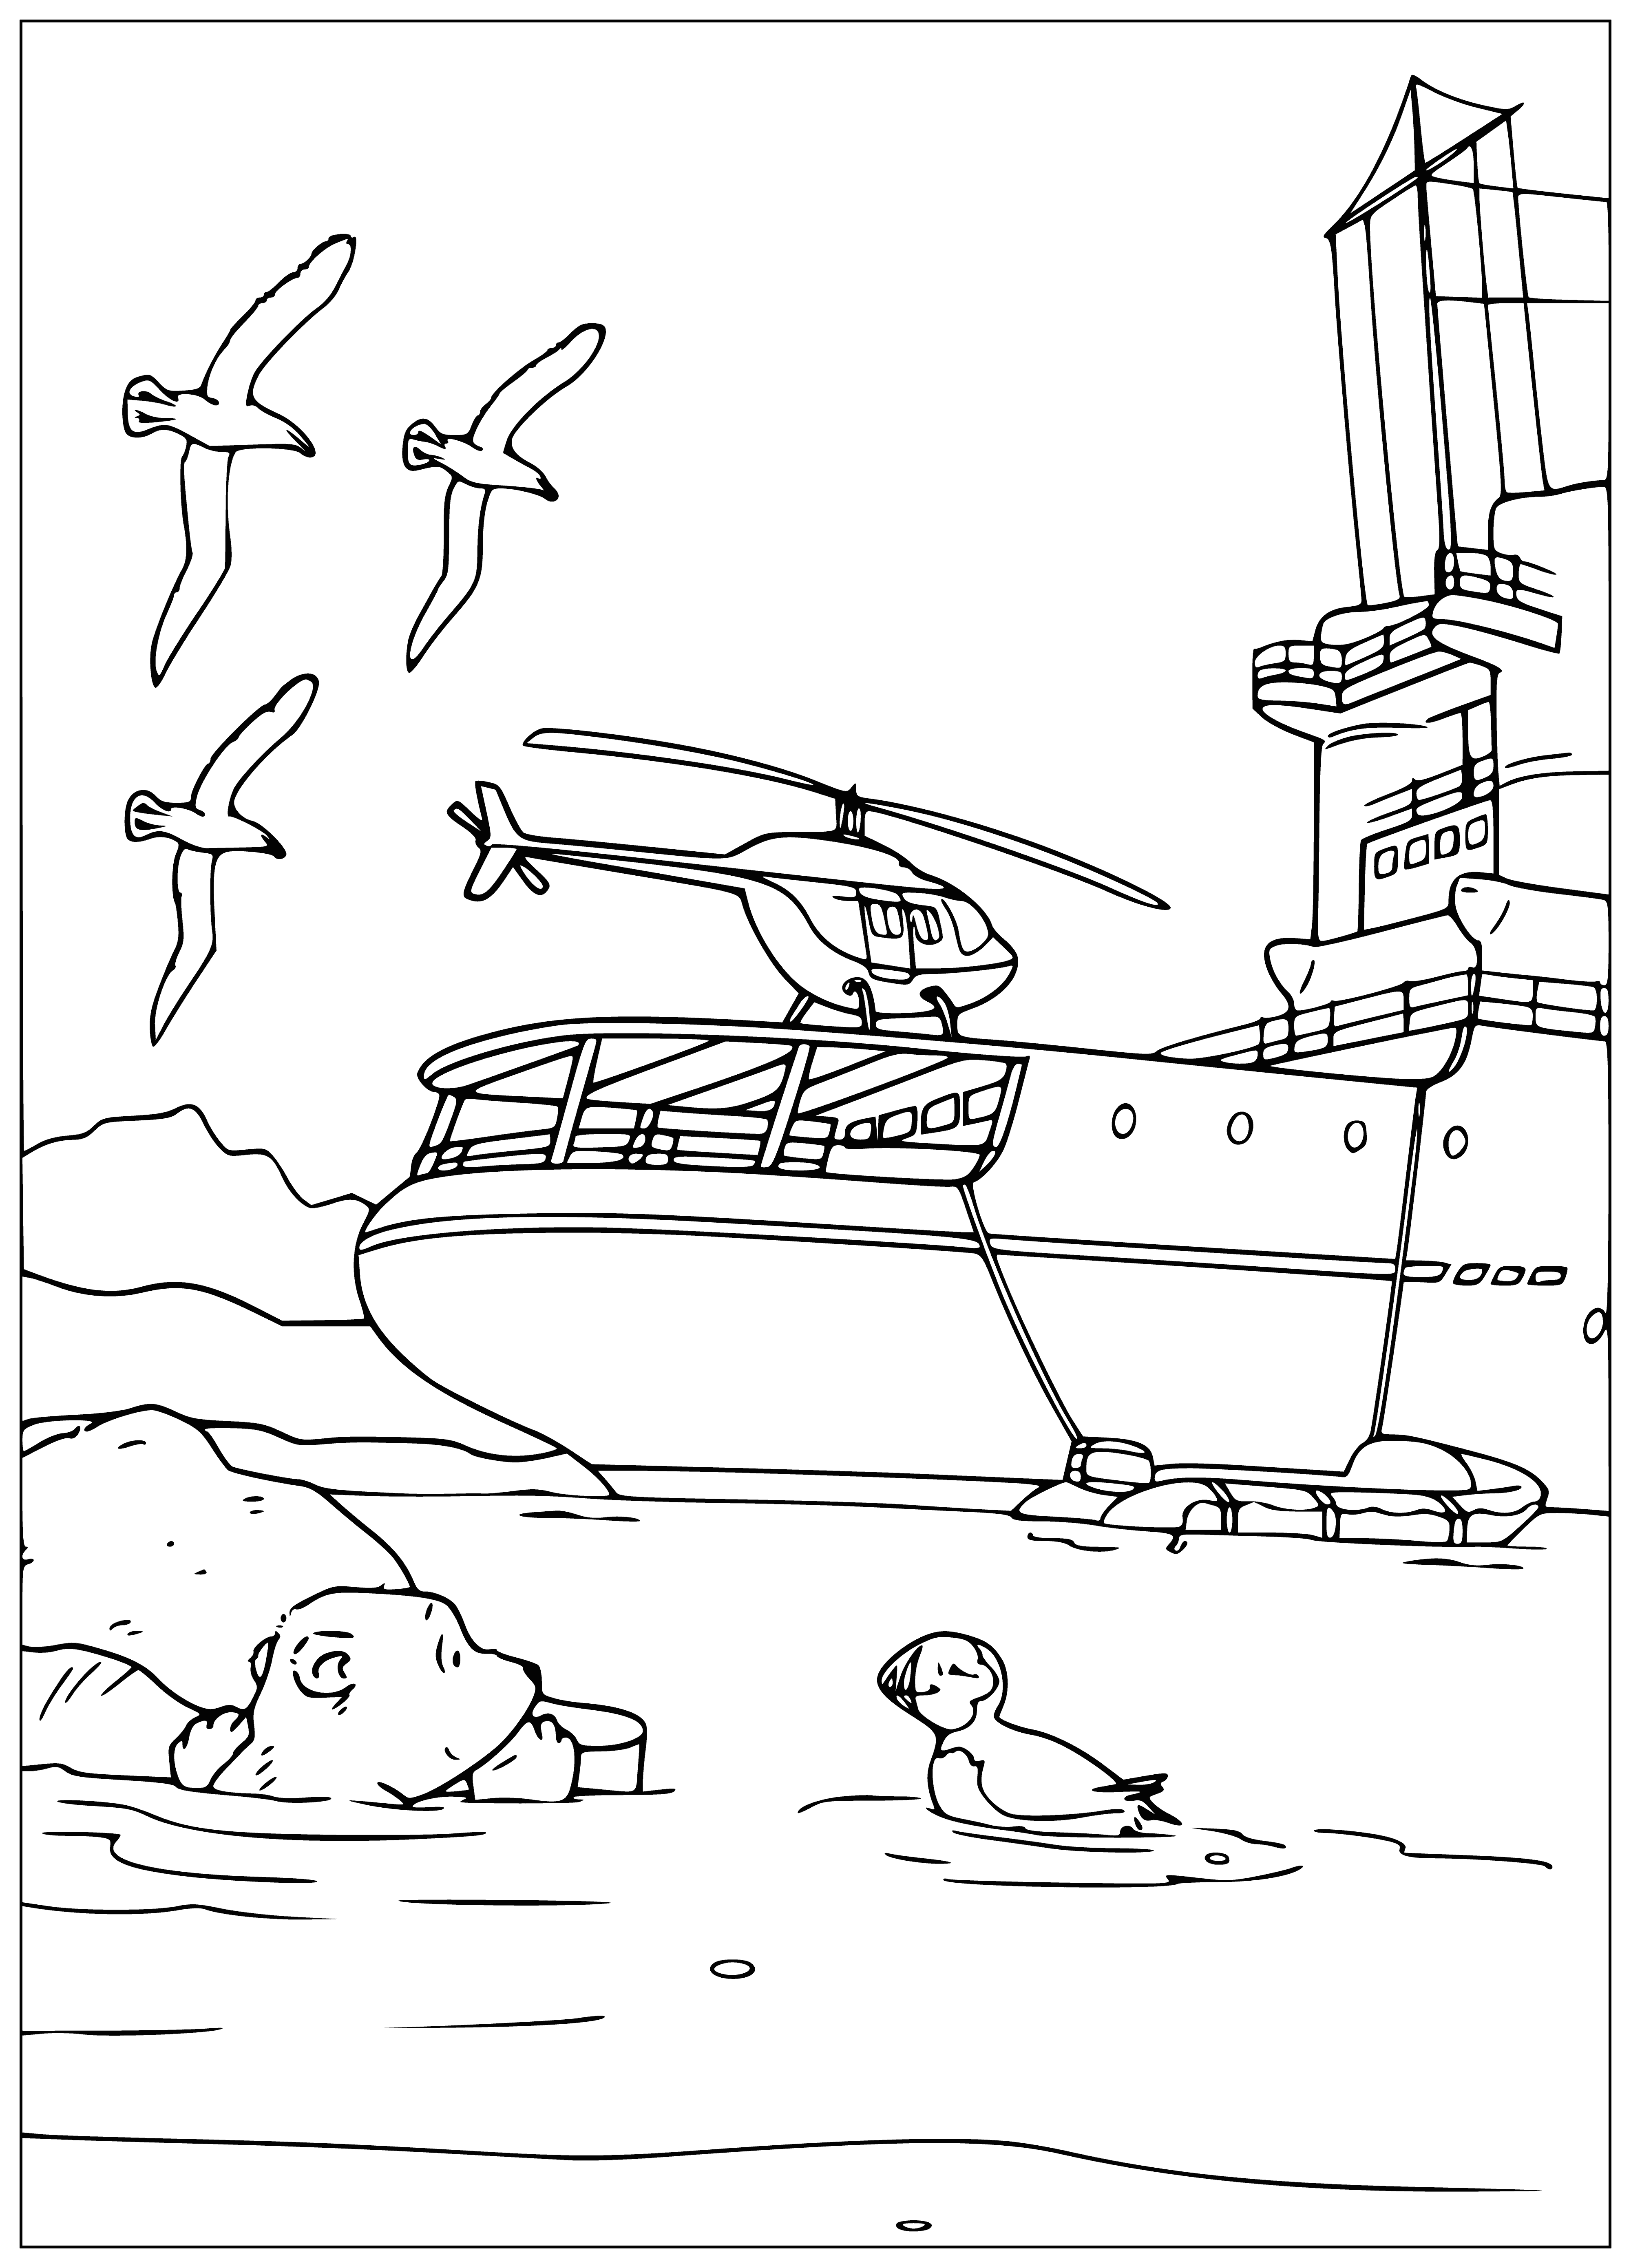 coloring page: Small polar bear on a fishing boat, rod in its paws, eagerly looking at the water.